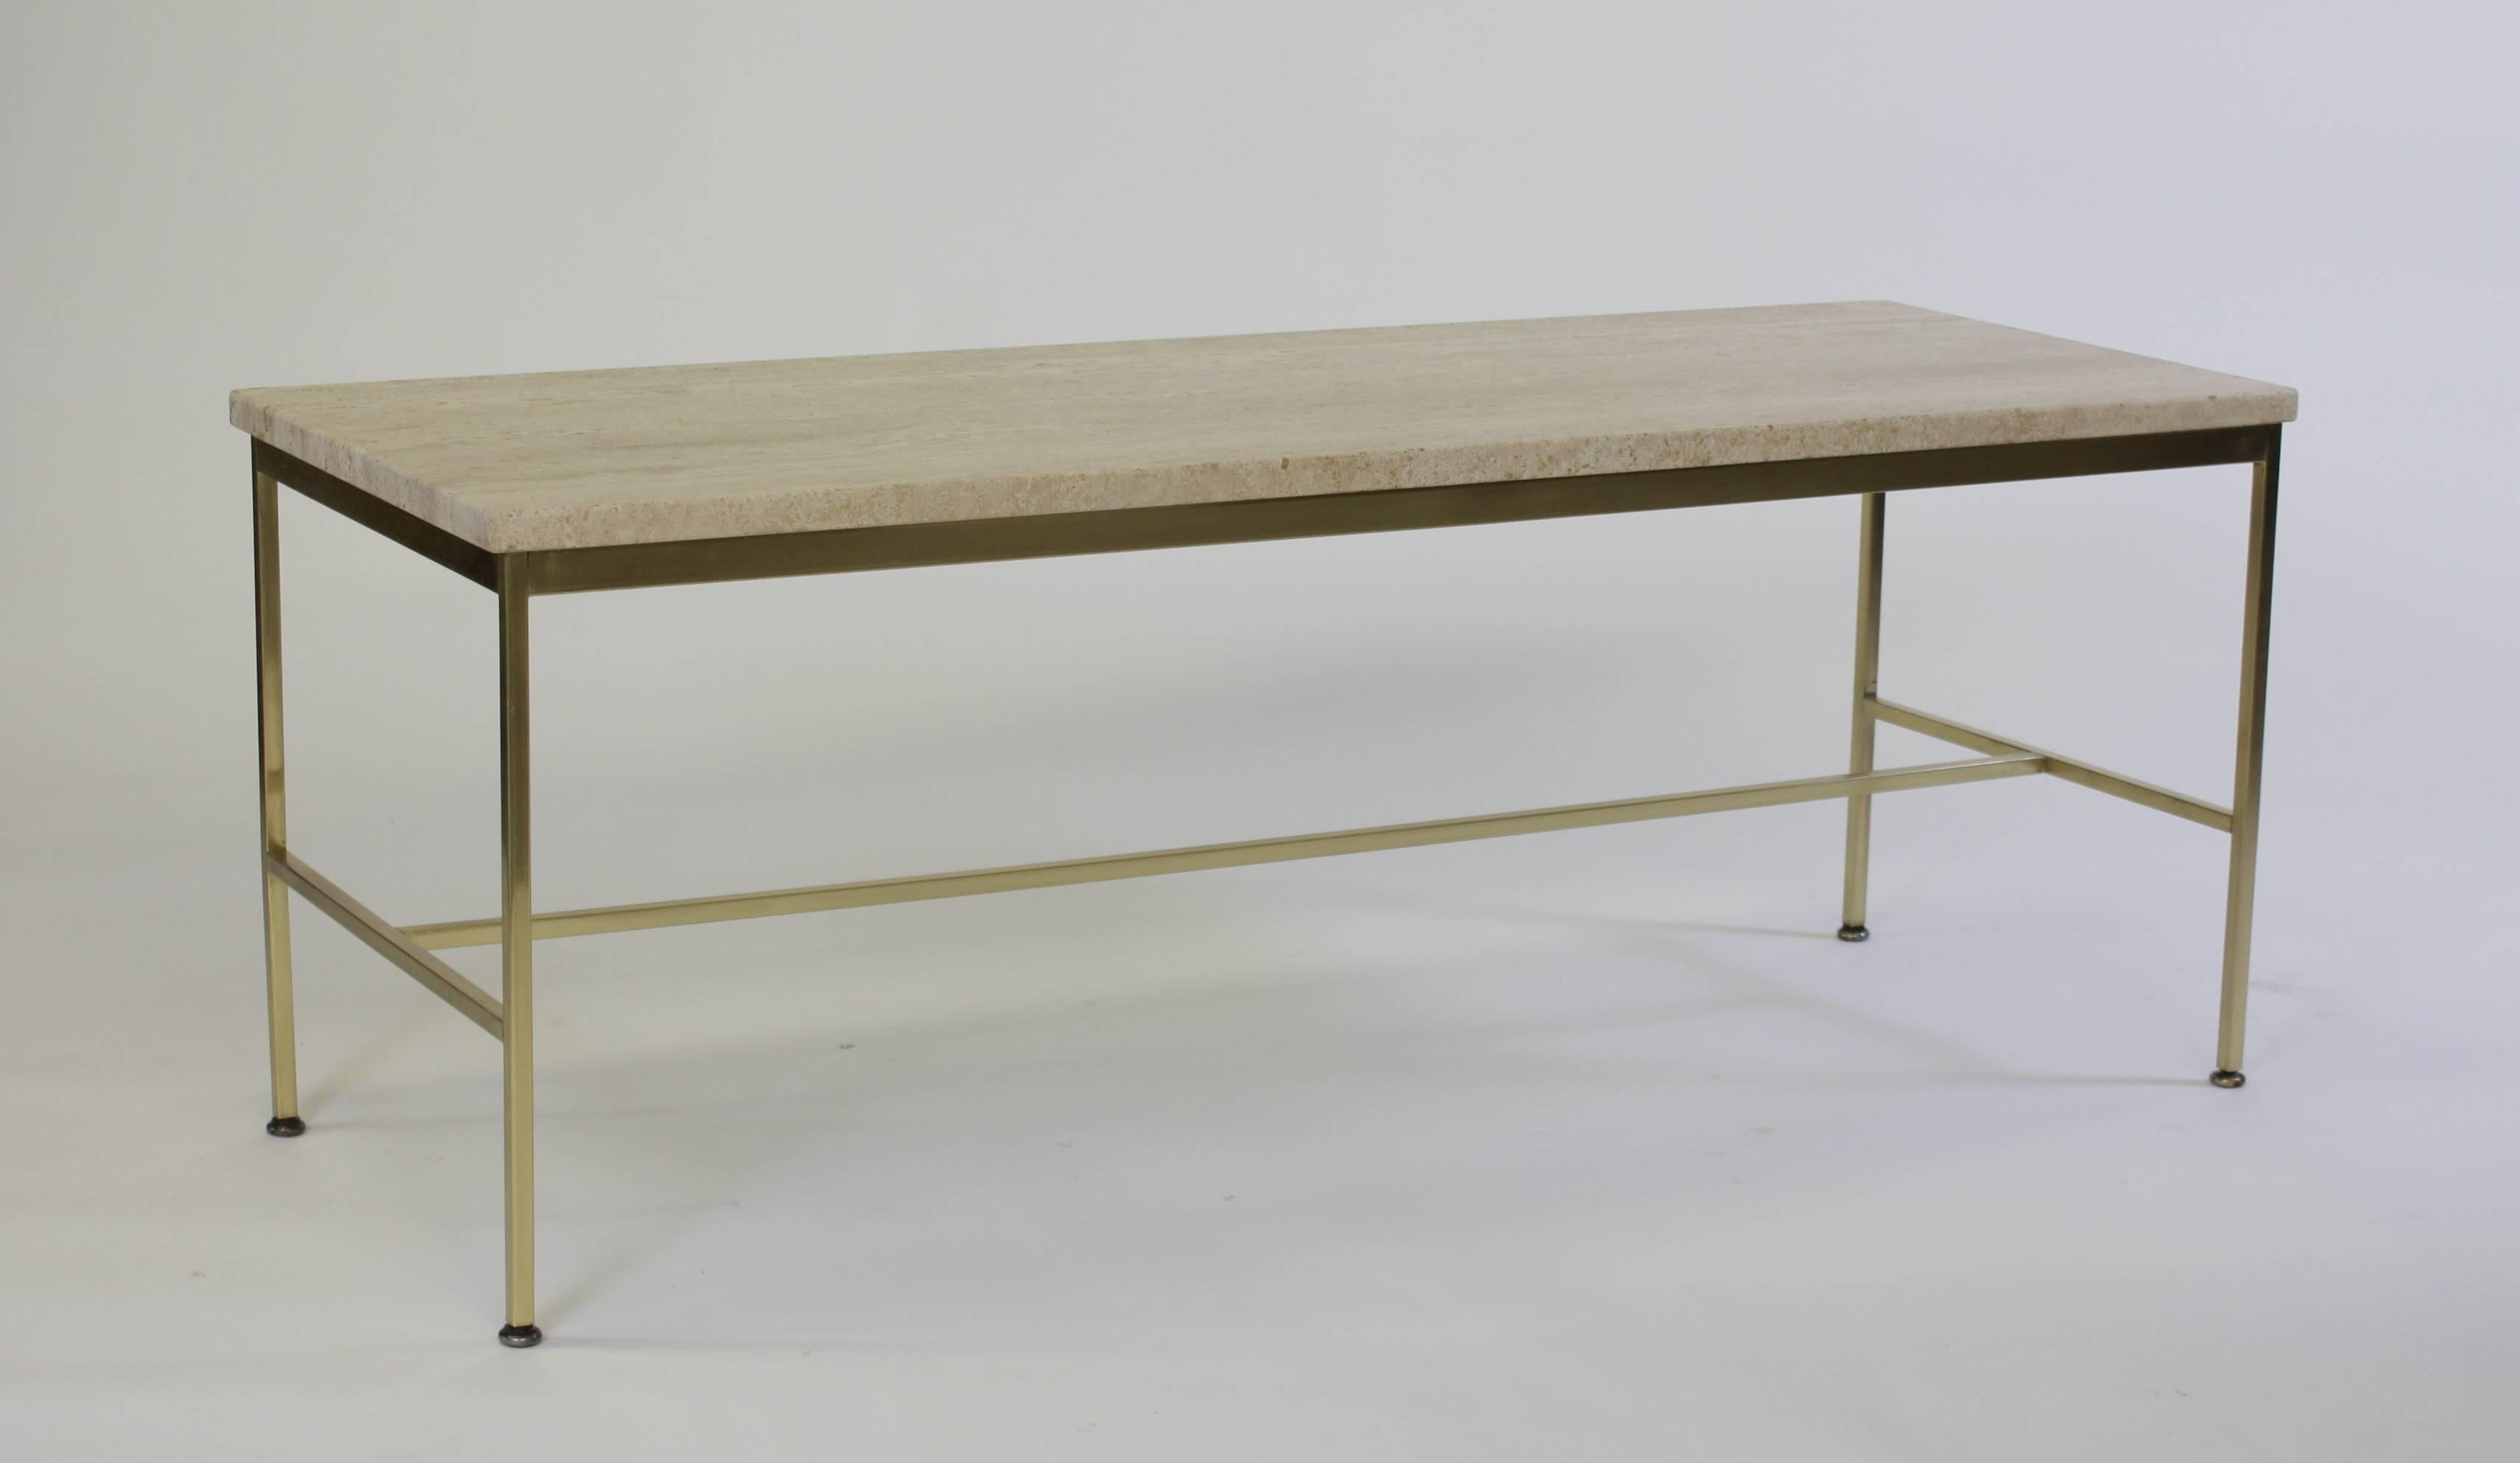 Elegant brass and travertine cocktail table designed by Paul McCobb for Calvin. One of two available from the curated collection Space 20th Century Modern.